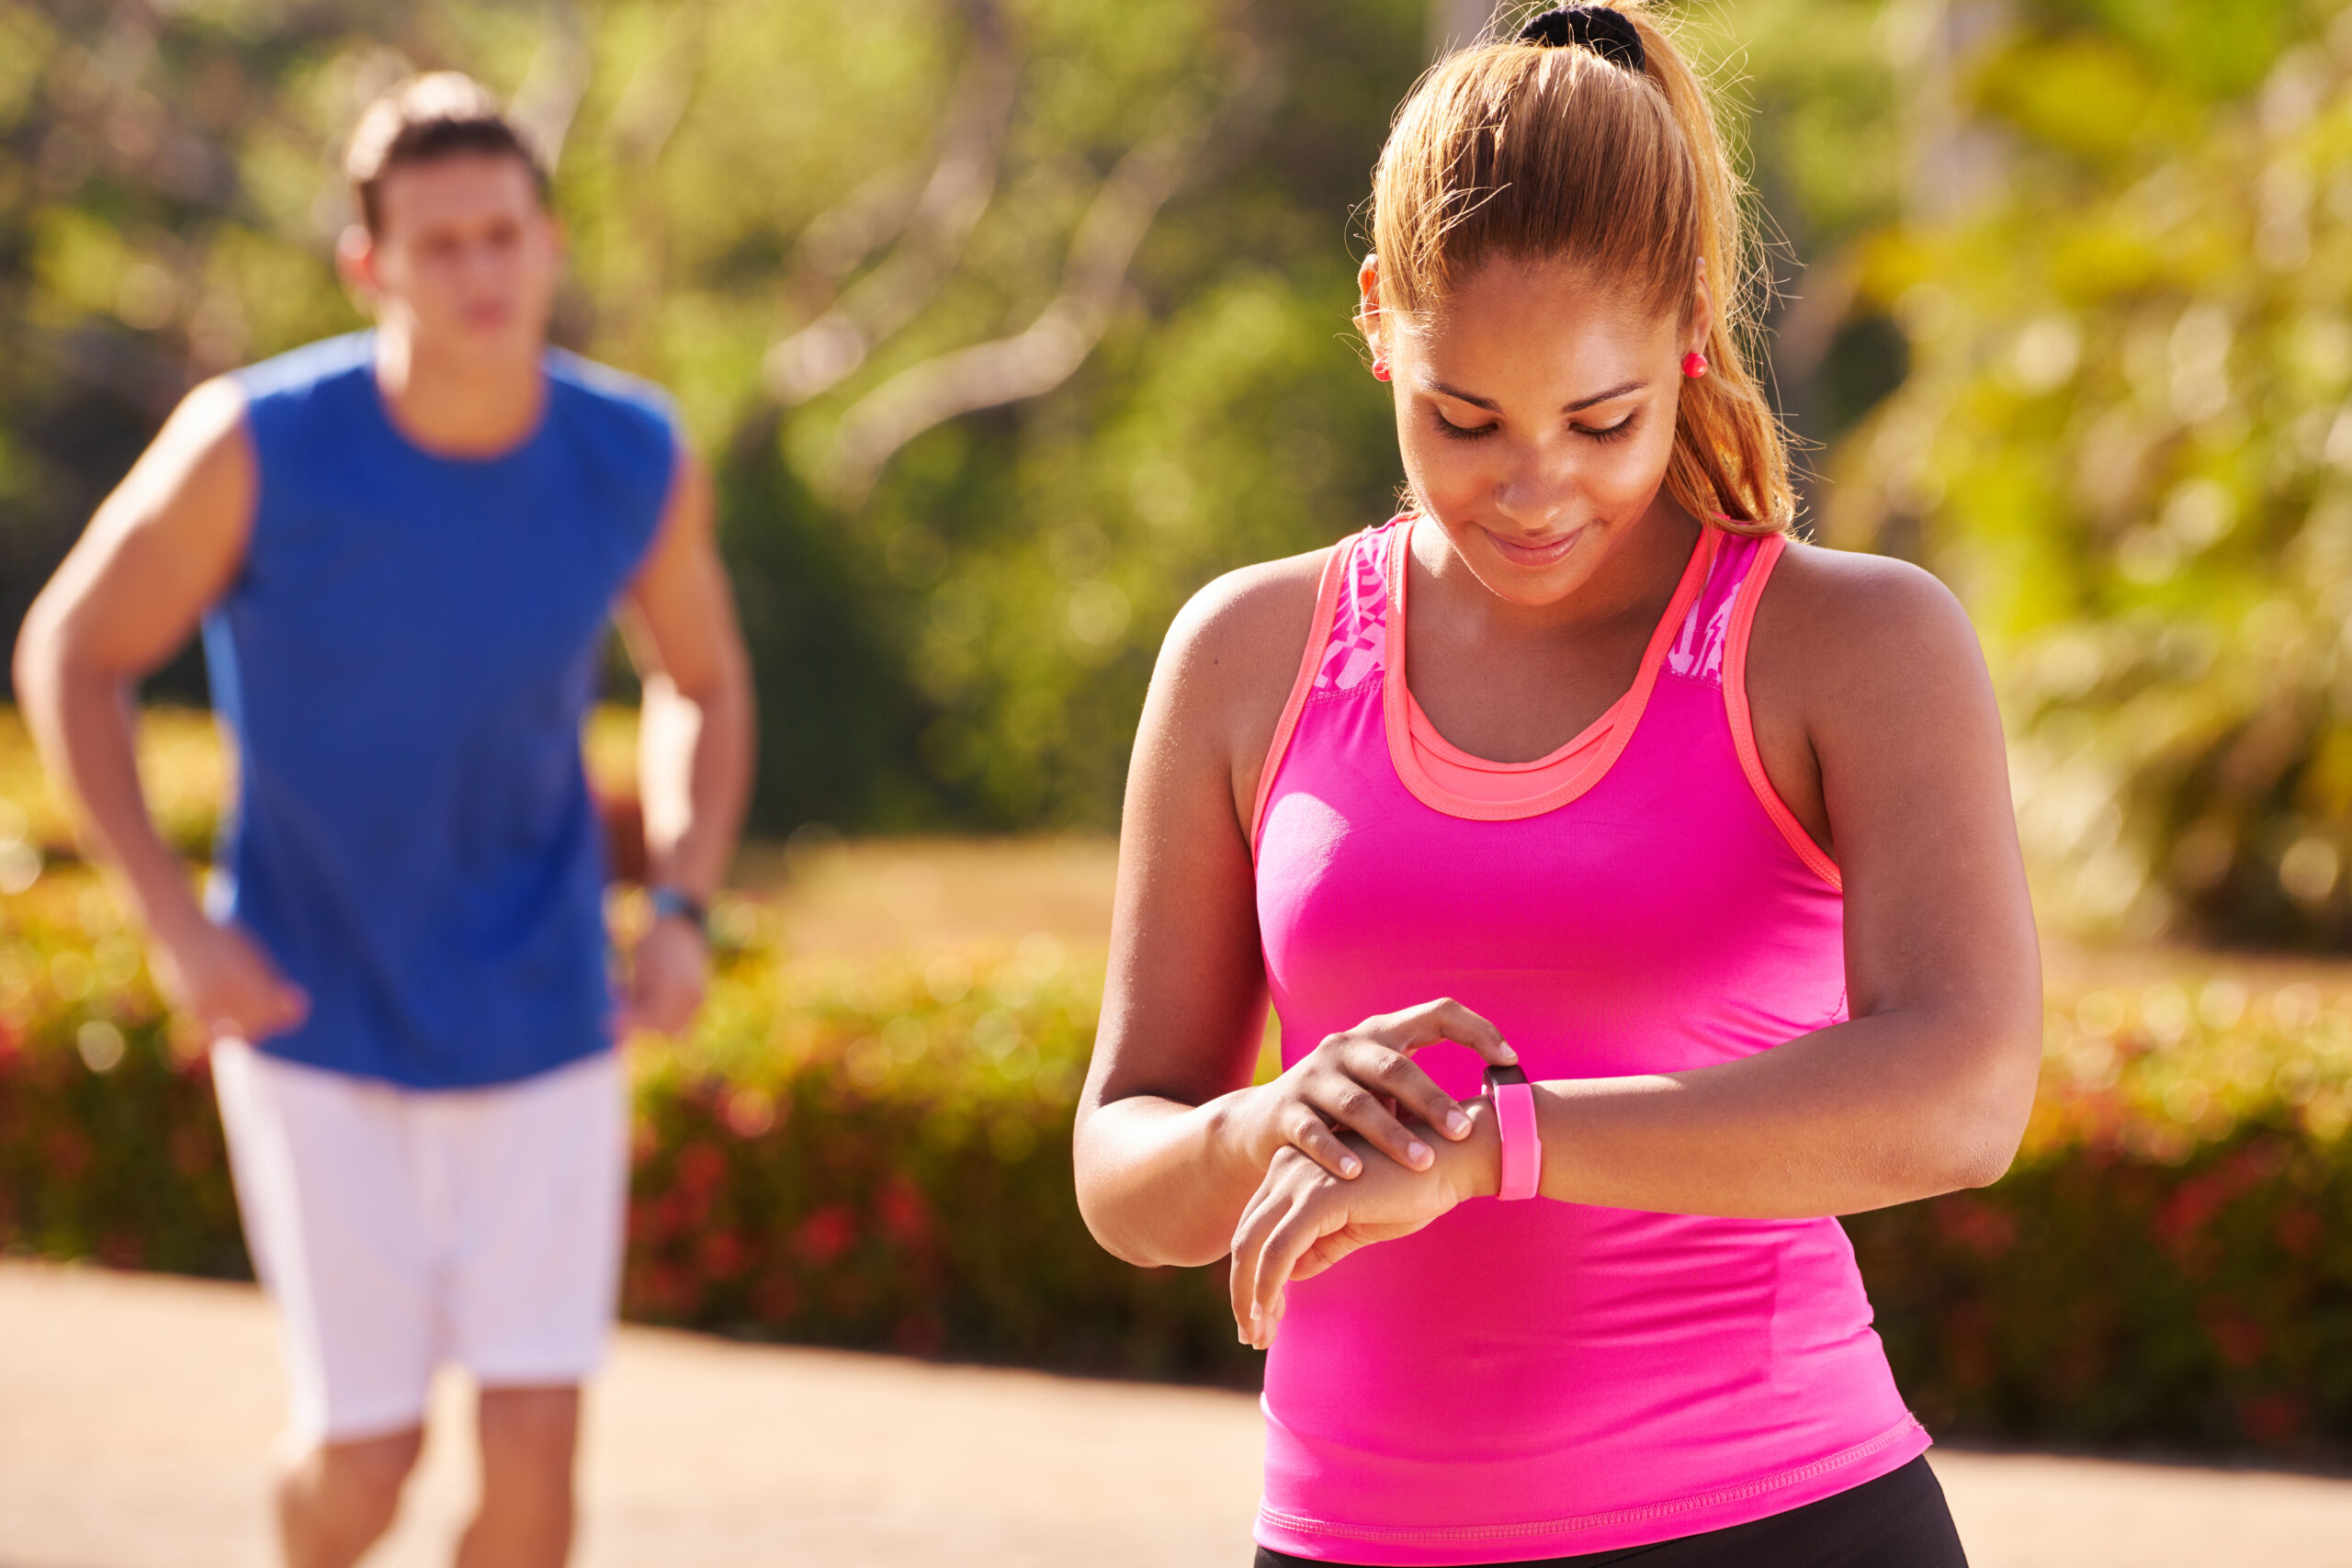 3 ways tracking steps helps you get more active